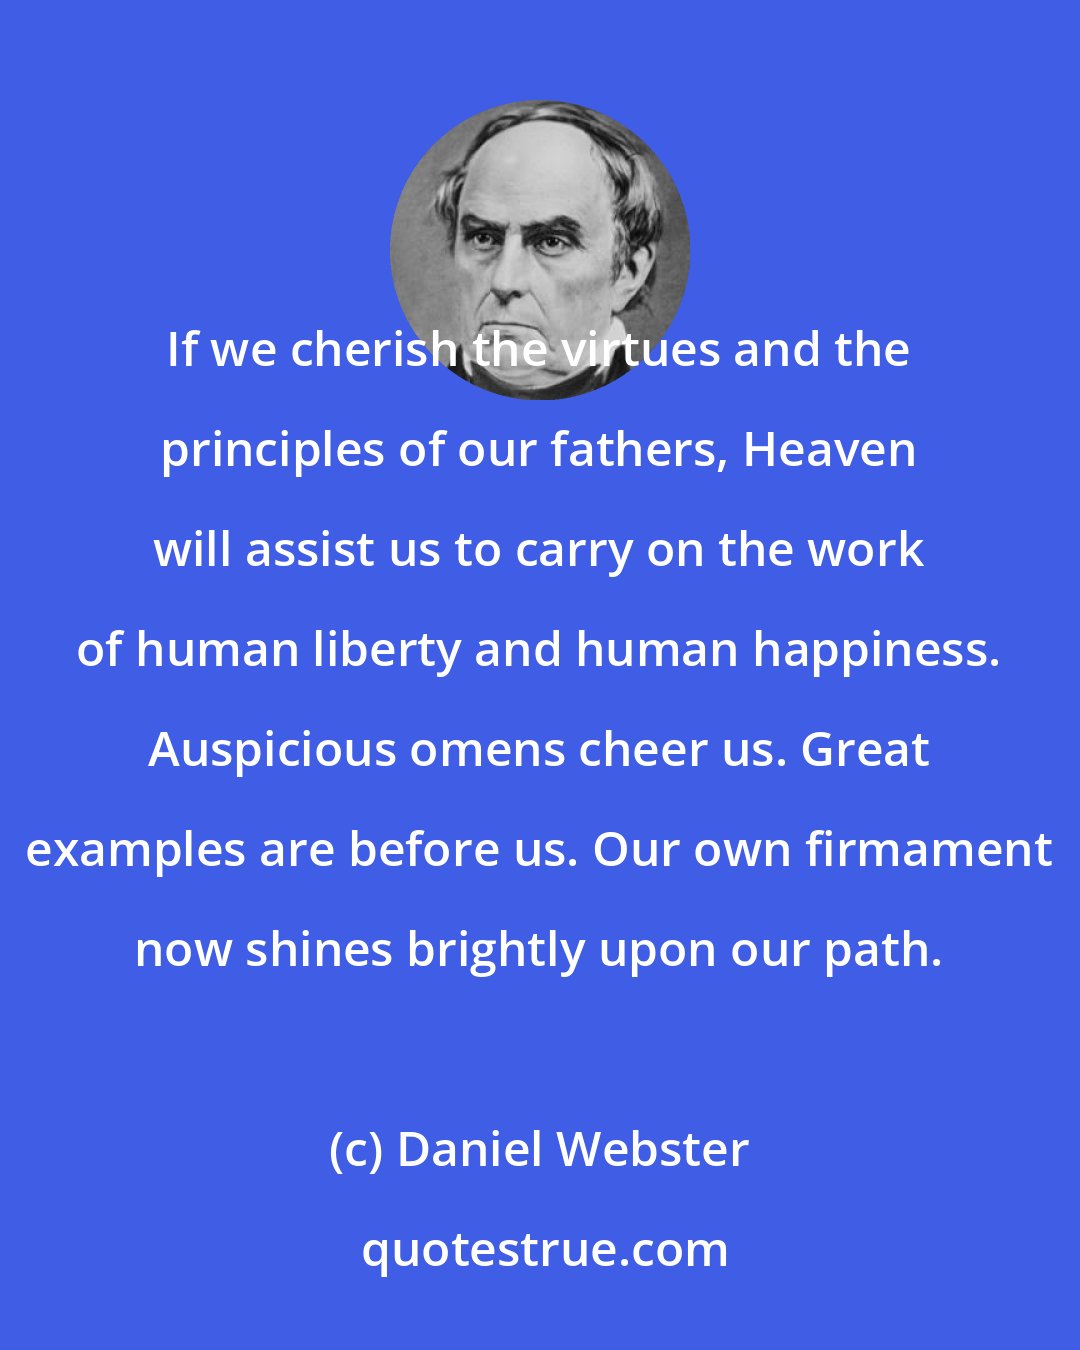 Daniel Webster: If we cherish the virtues and the principles of our fathers, Heaven will assist us to carry on the work of human liberty and human happiness. Auspicious omens cheer us. Great examples are before us. Our own firmament now shines brightly upon our path.